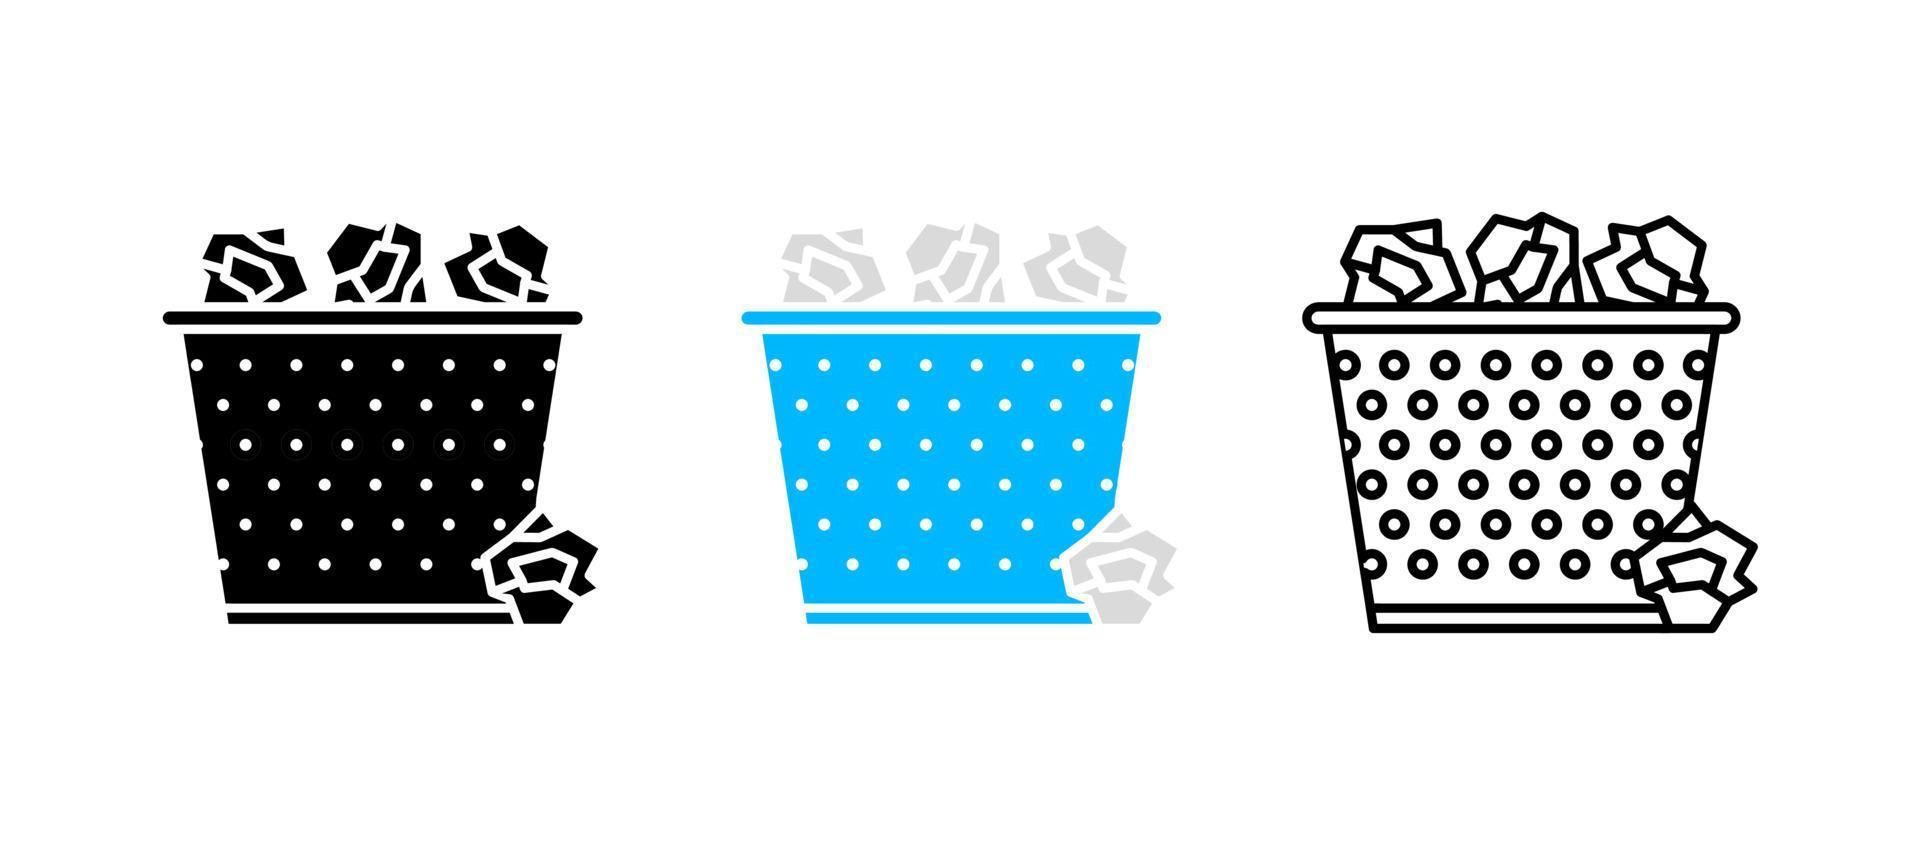 Trash can set. Paper trash can vector icon set. Editable row set. Silhouette, colored, linear icon set. Logo-web, icon design element.